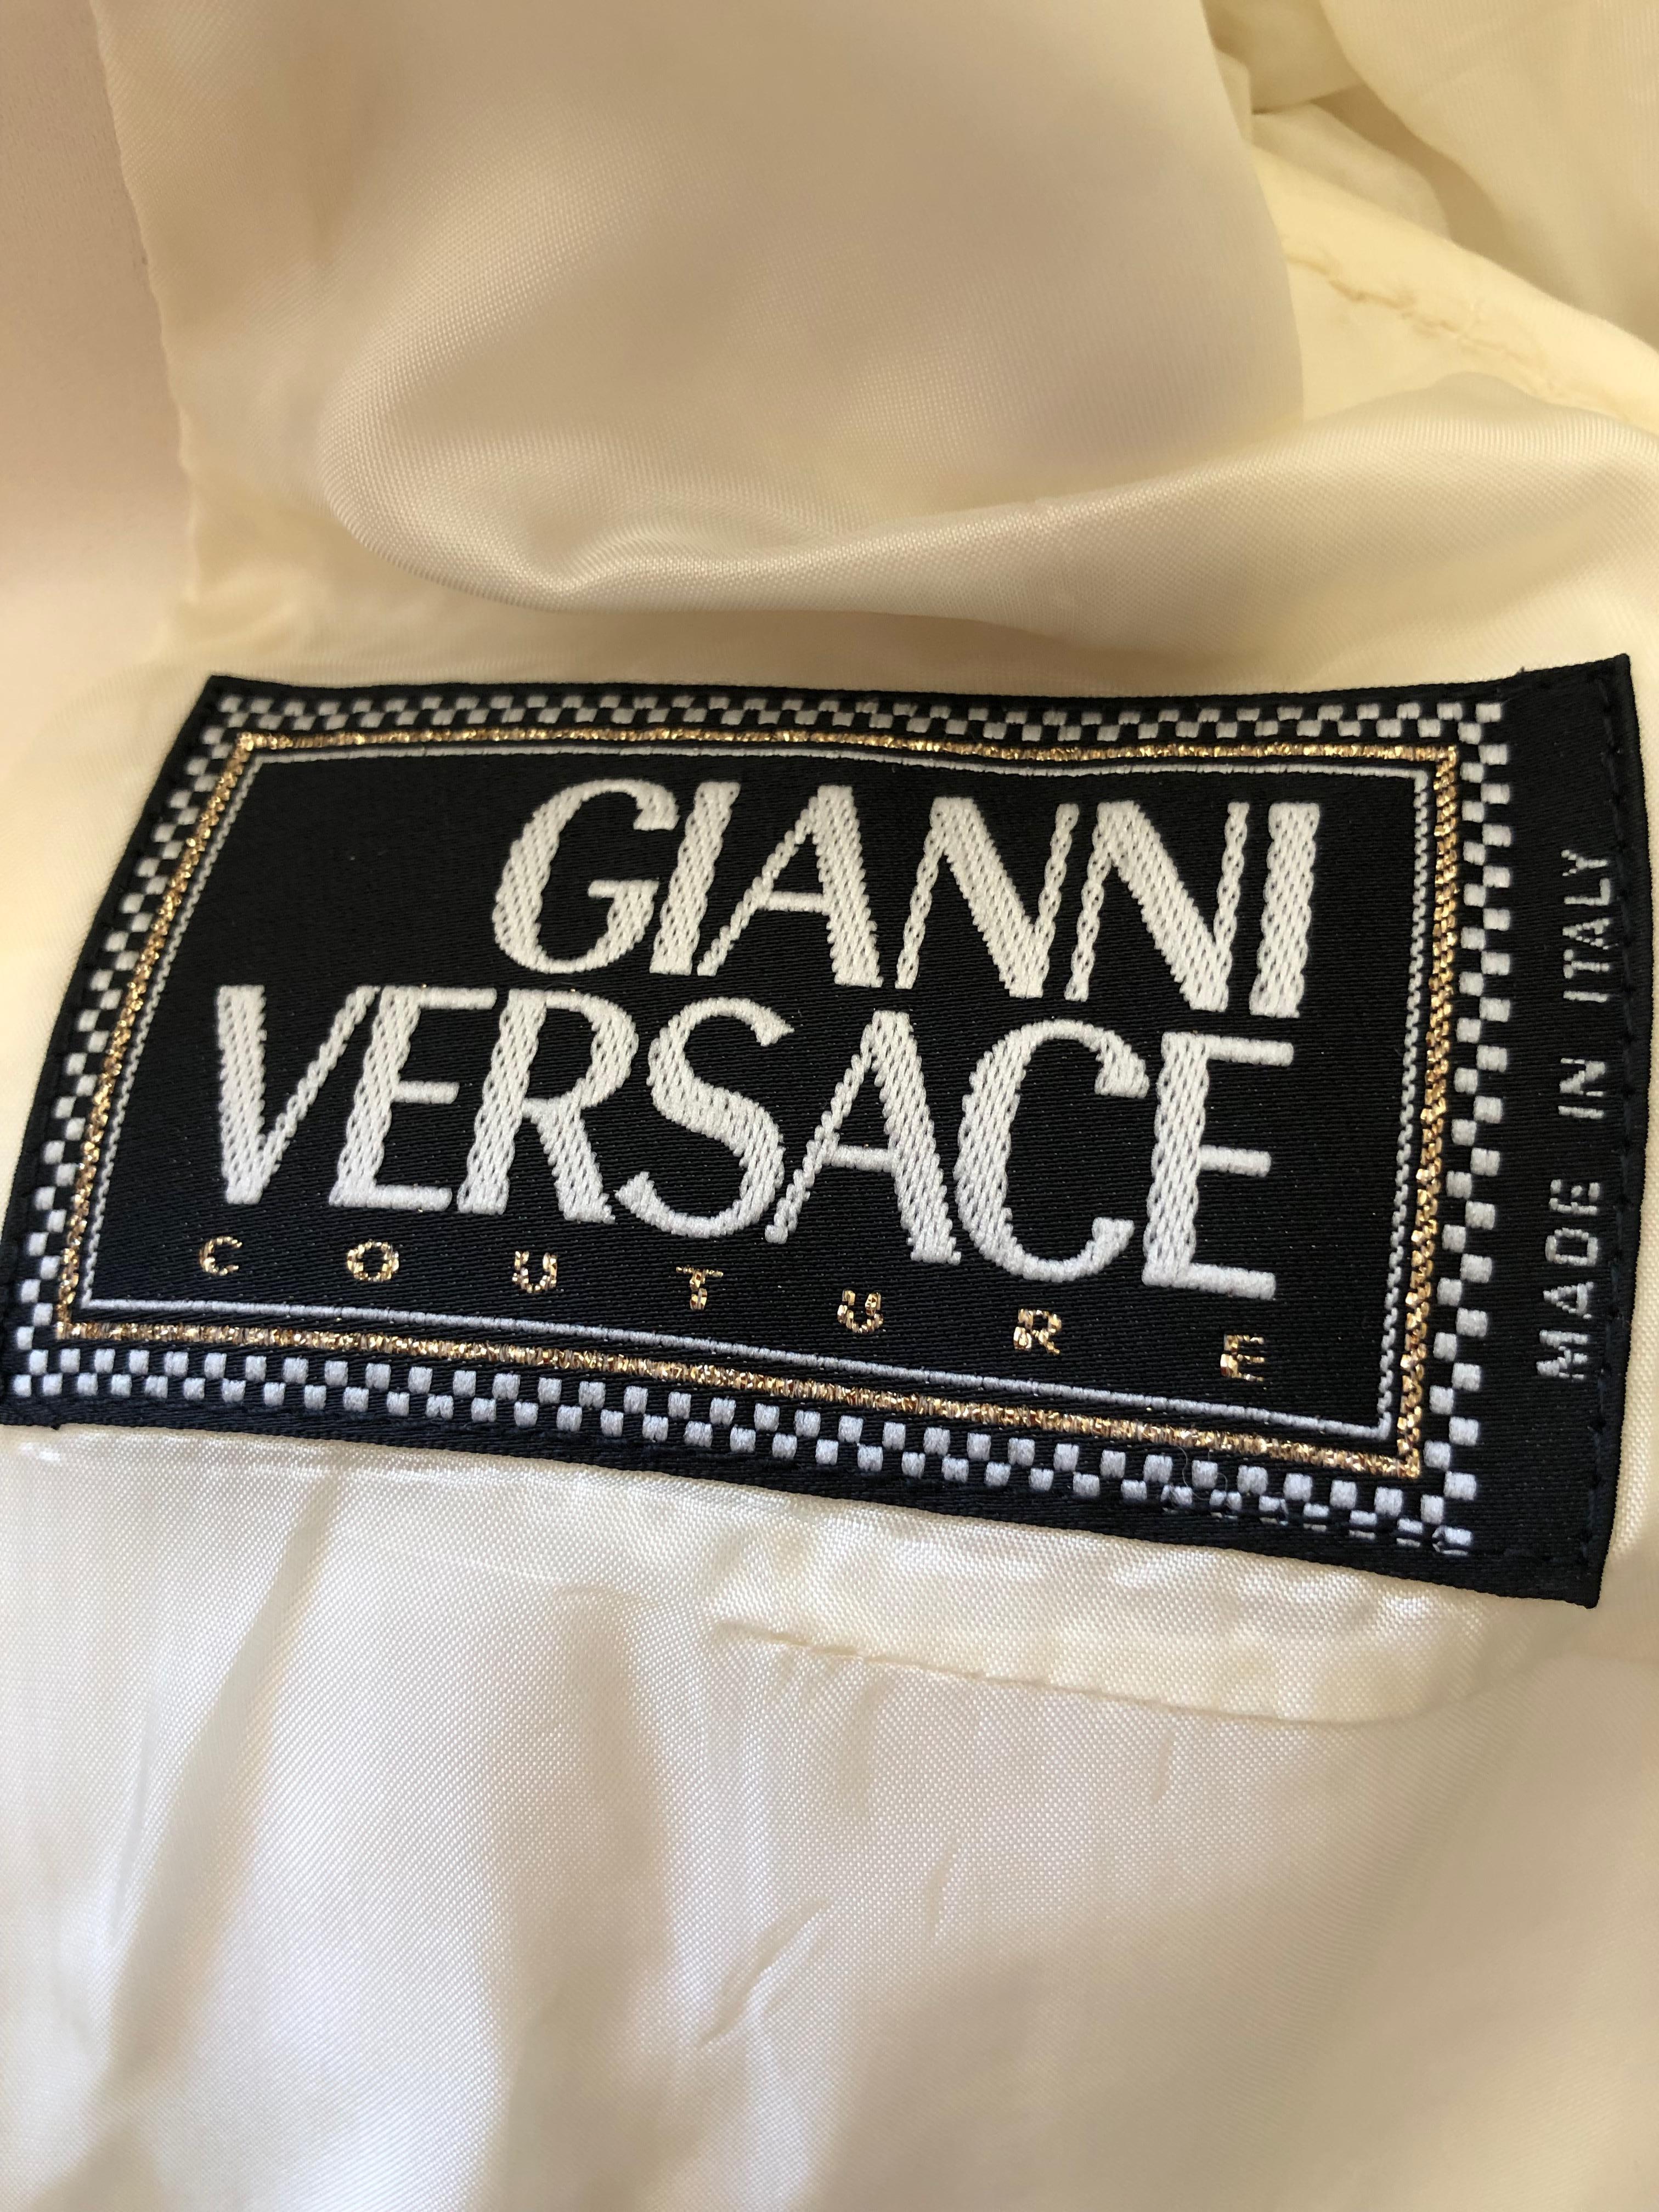 Gianni Versace Couture Fall 1992 Ivory Linen Tuxedo Suit w Corset Stay Details For Sale 6